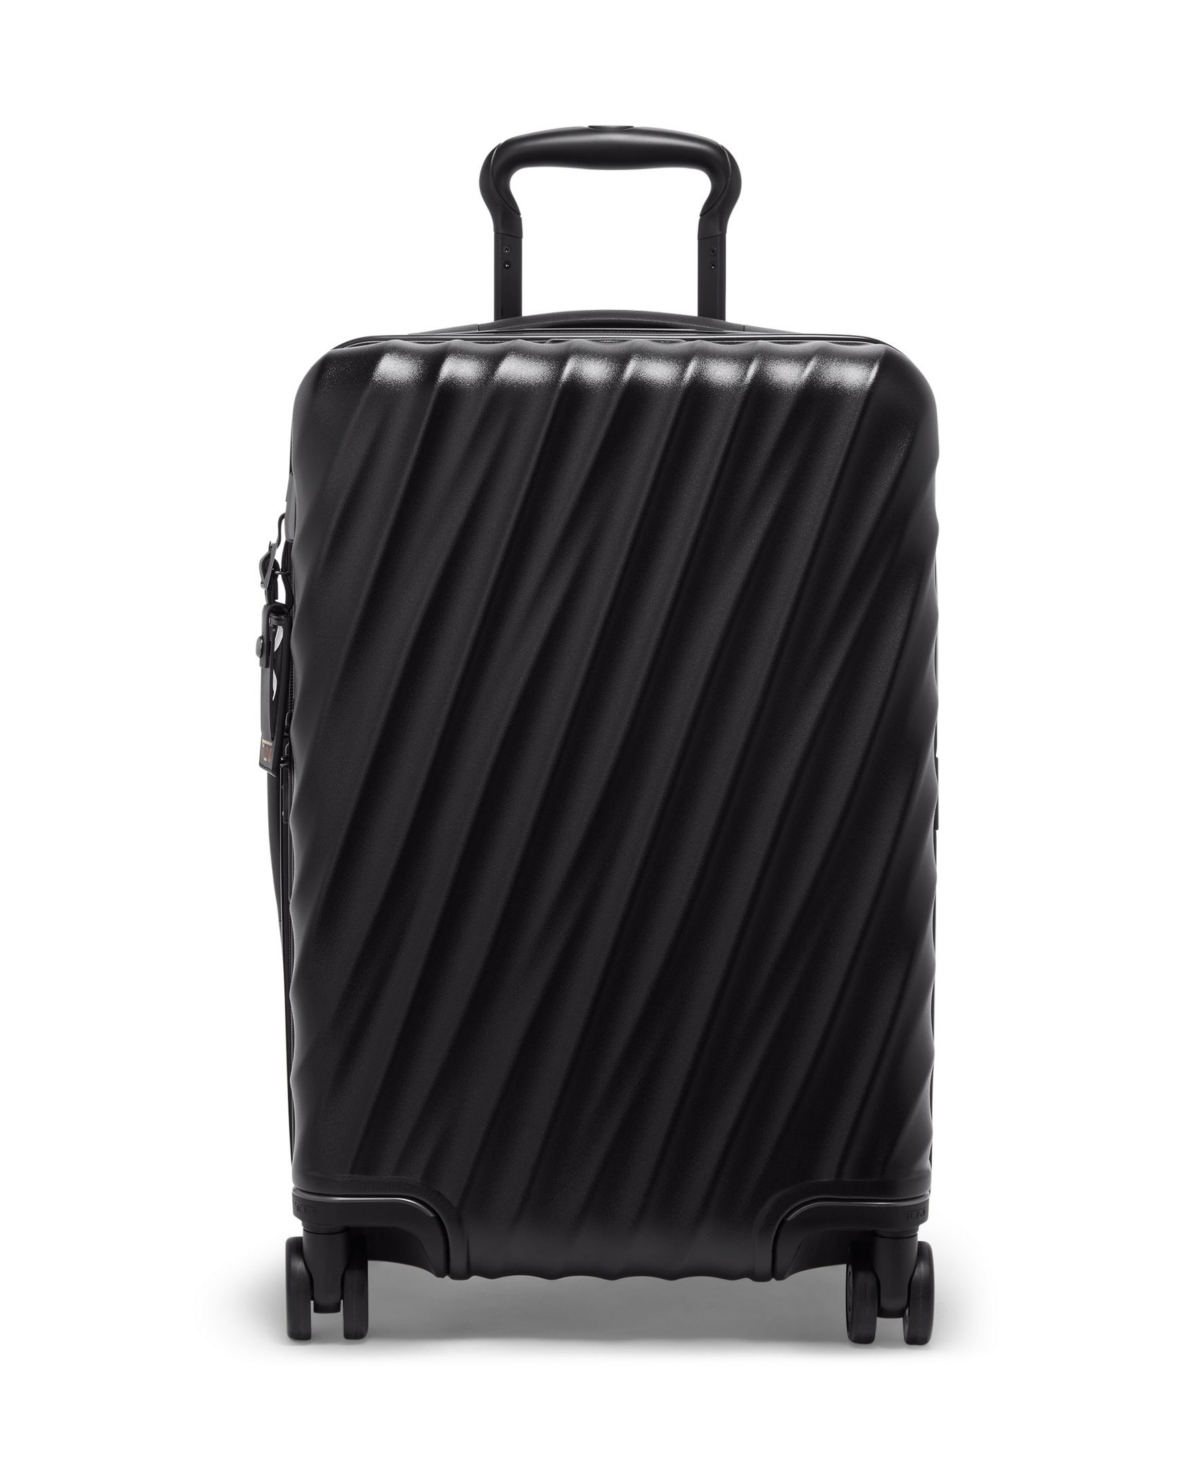 Tumi 19 Degree International Expandable Carry On In Black Texture